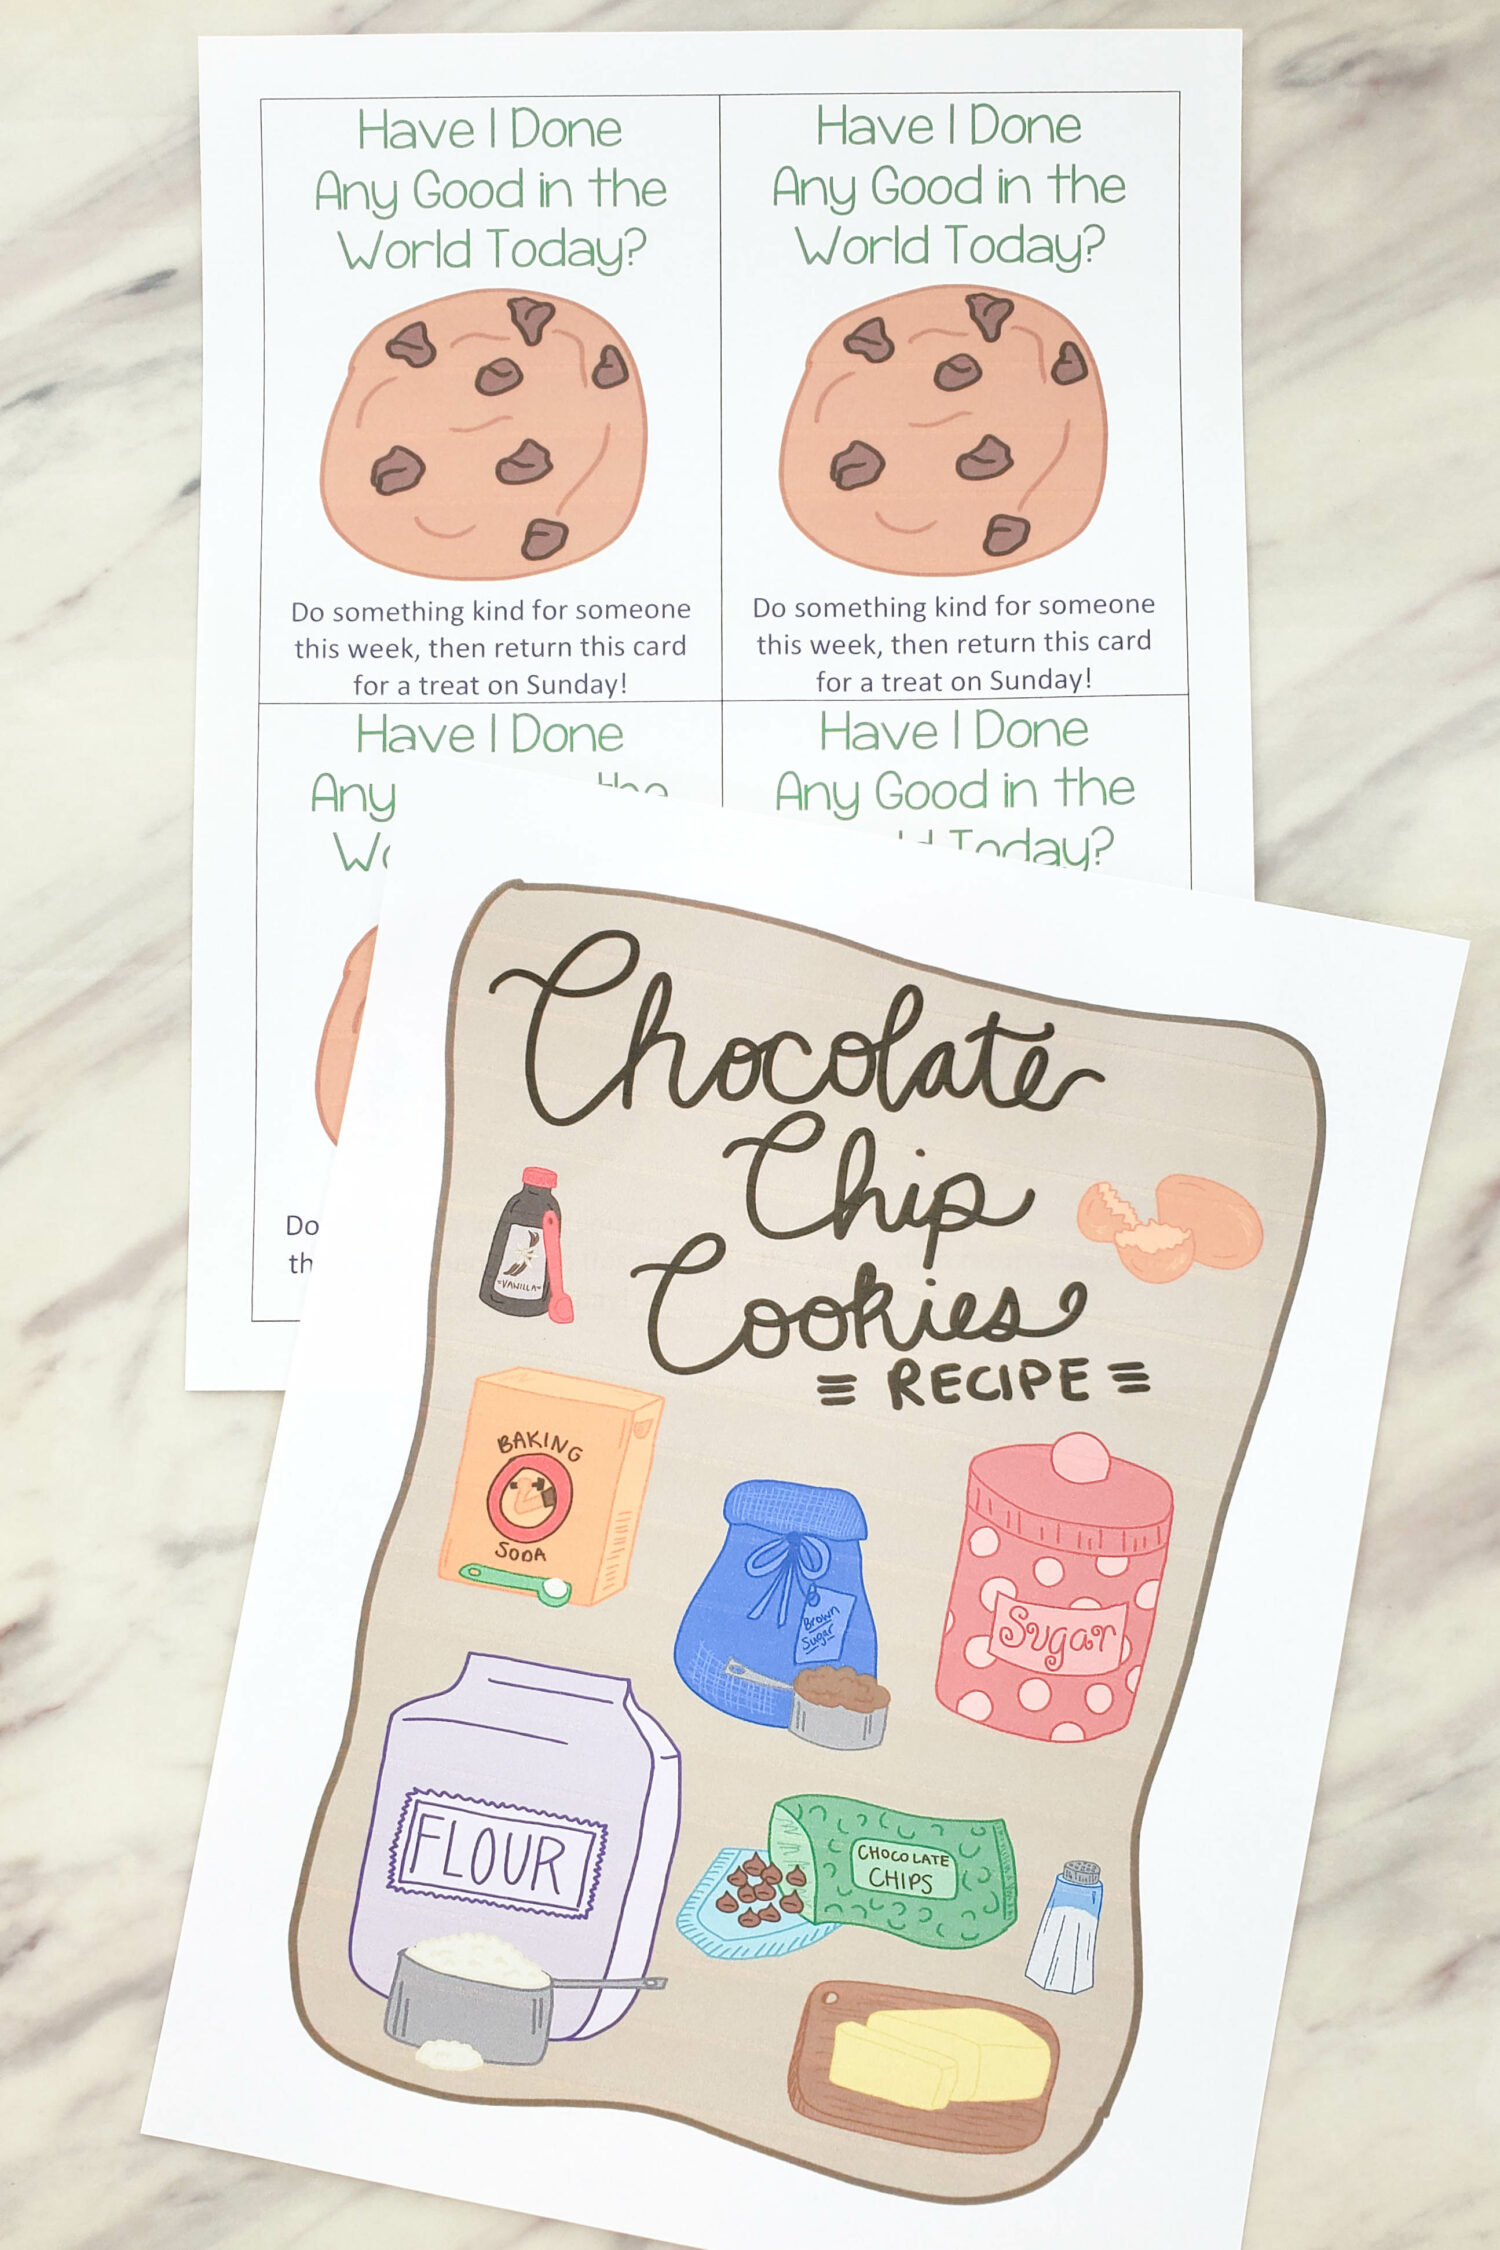 Have I Done Any Good Making Cookies fun and engaging singing time idea! You'll love this lesson plan to add in different cookie making ingredients for Chocolate Chip Cookies. Then, share that something good from this analogy by sharing homemade cookies! Fun lesson plan for LDS Primary Music leaders with printable song helps or also wonderful activity for families or teachers for Come Follow Me.